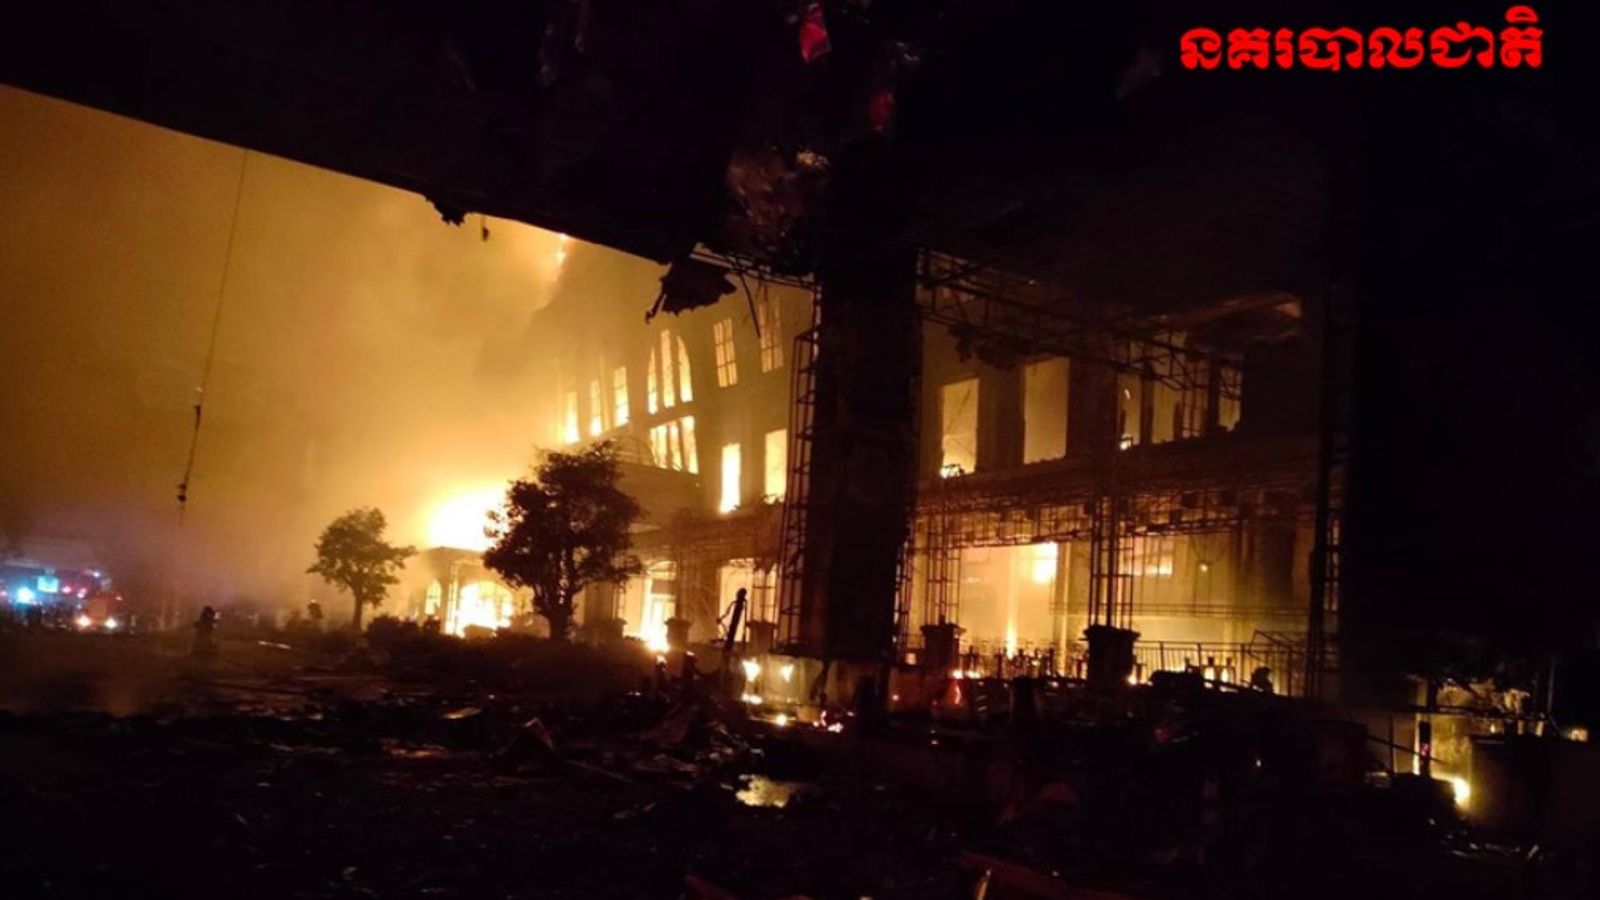 At least 10 people dead in fire at casino and hotel in Poipet, Cambodia